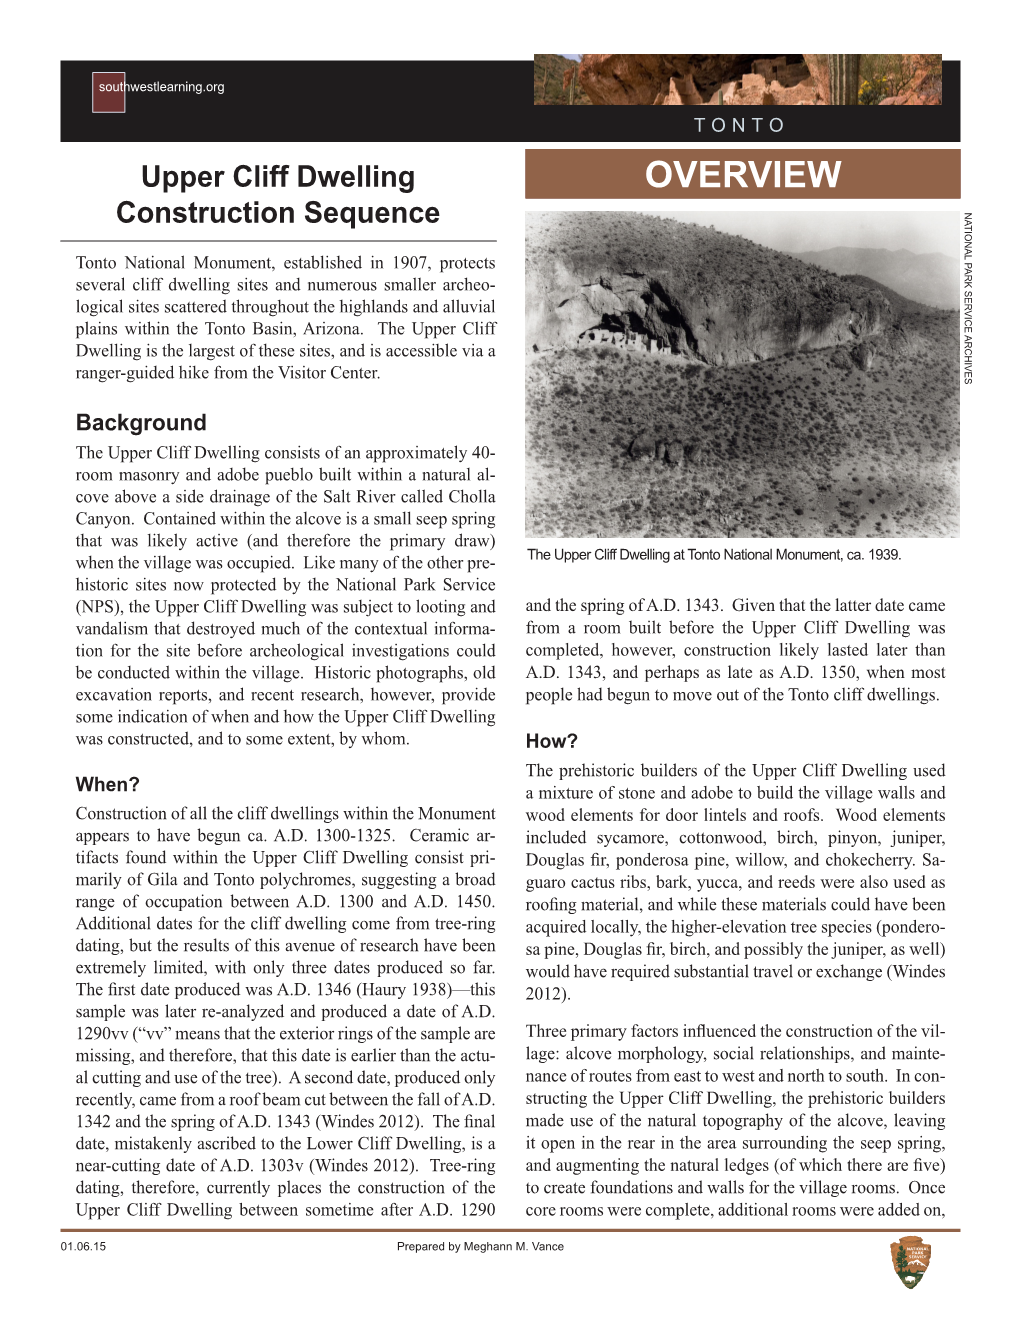 FACT SHEET OVERVIEW Upper Cliff Dwelling